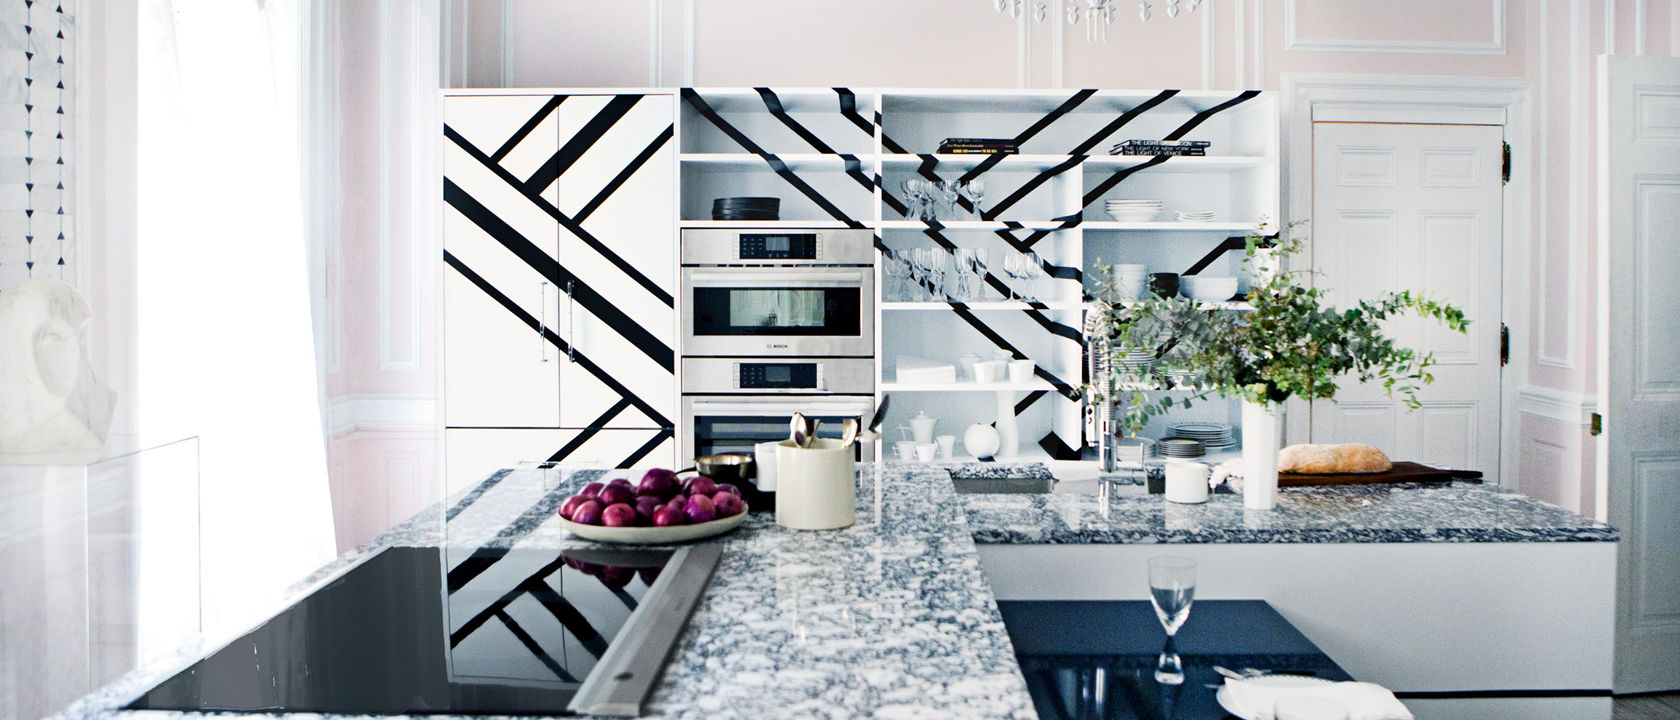 Get the Look: 5 Bold, Beautiful Kitchens and the Features That